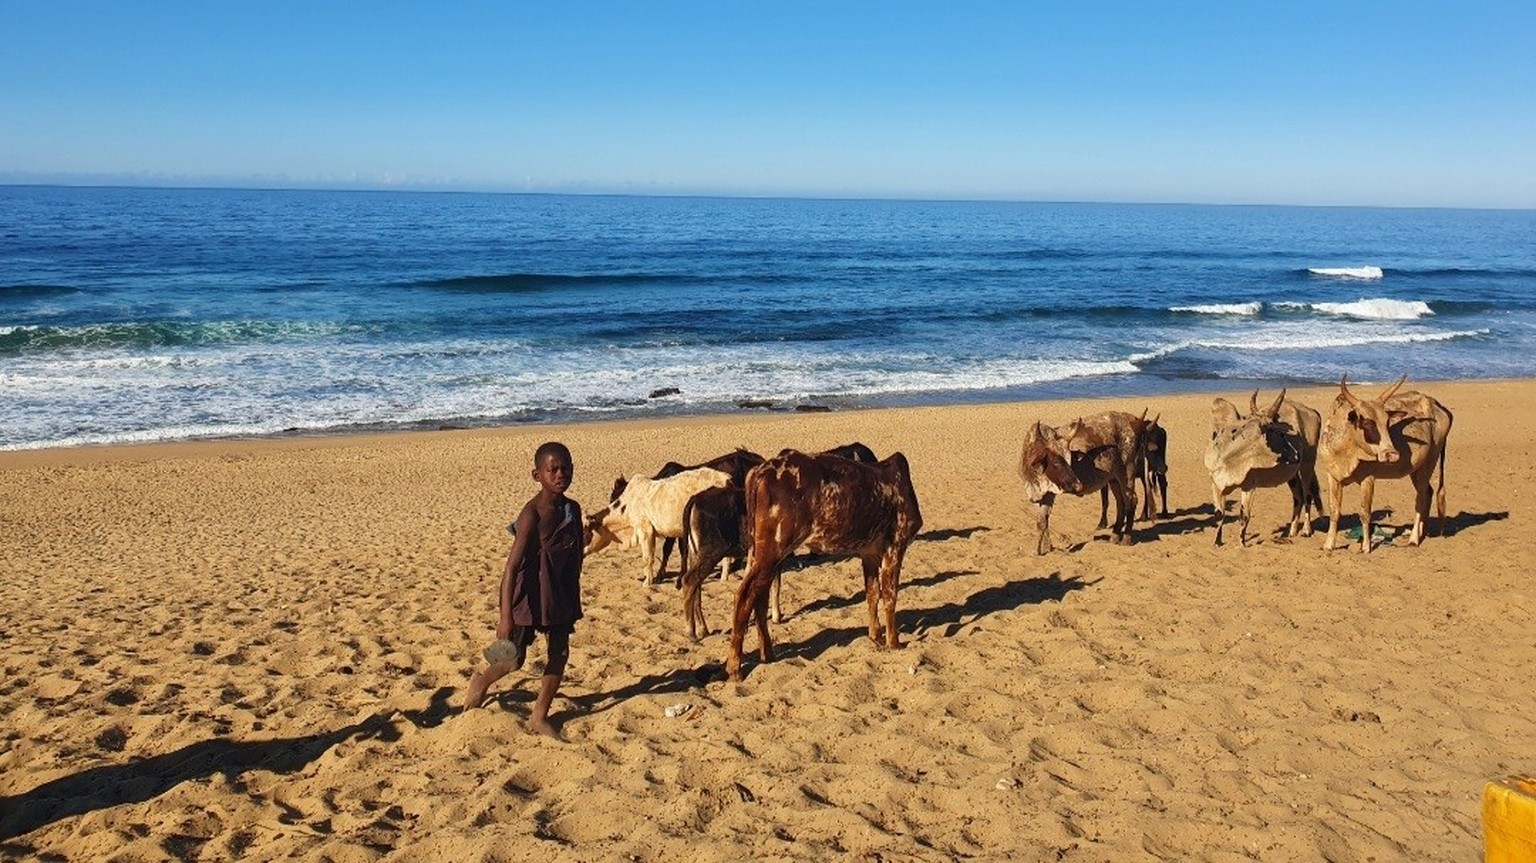 madagascar, boy with his cows drinking ocean water